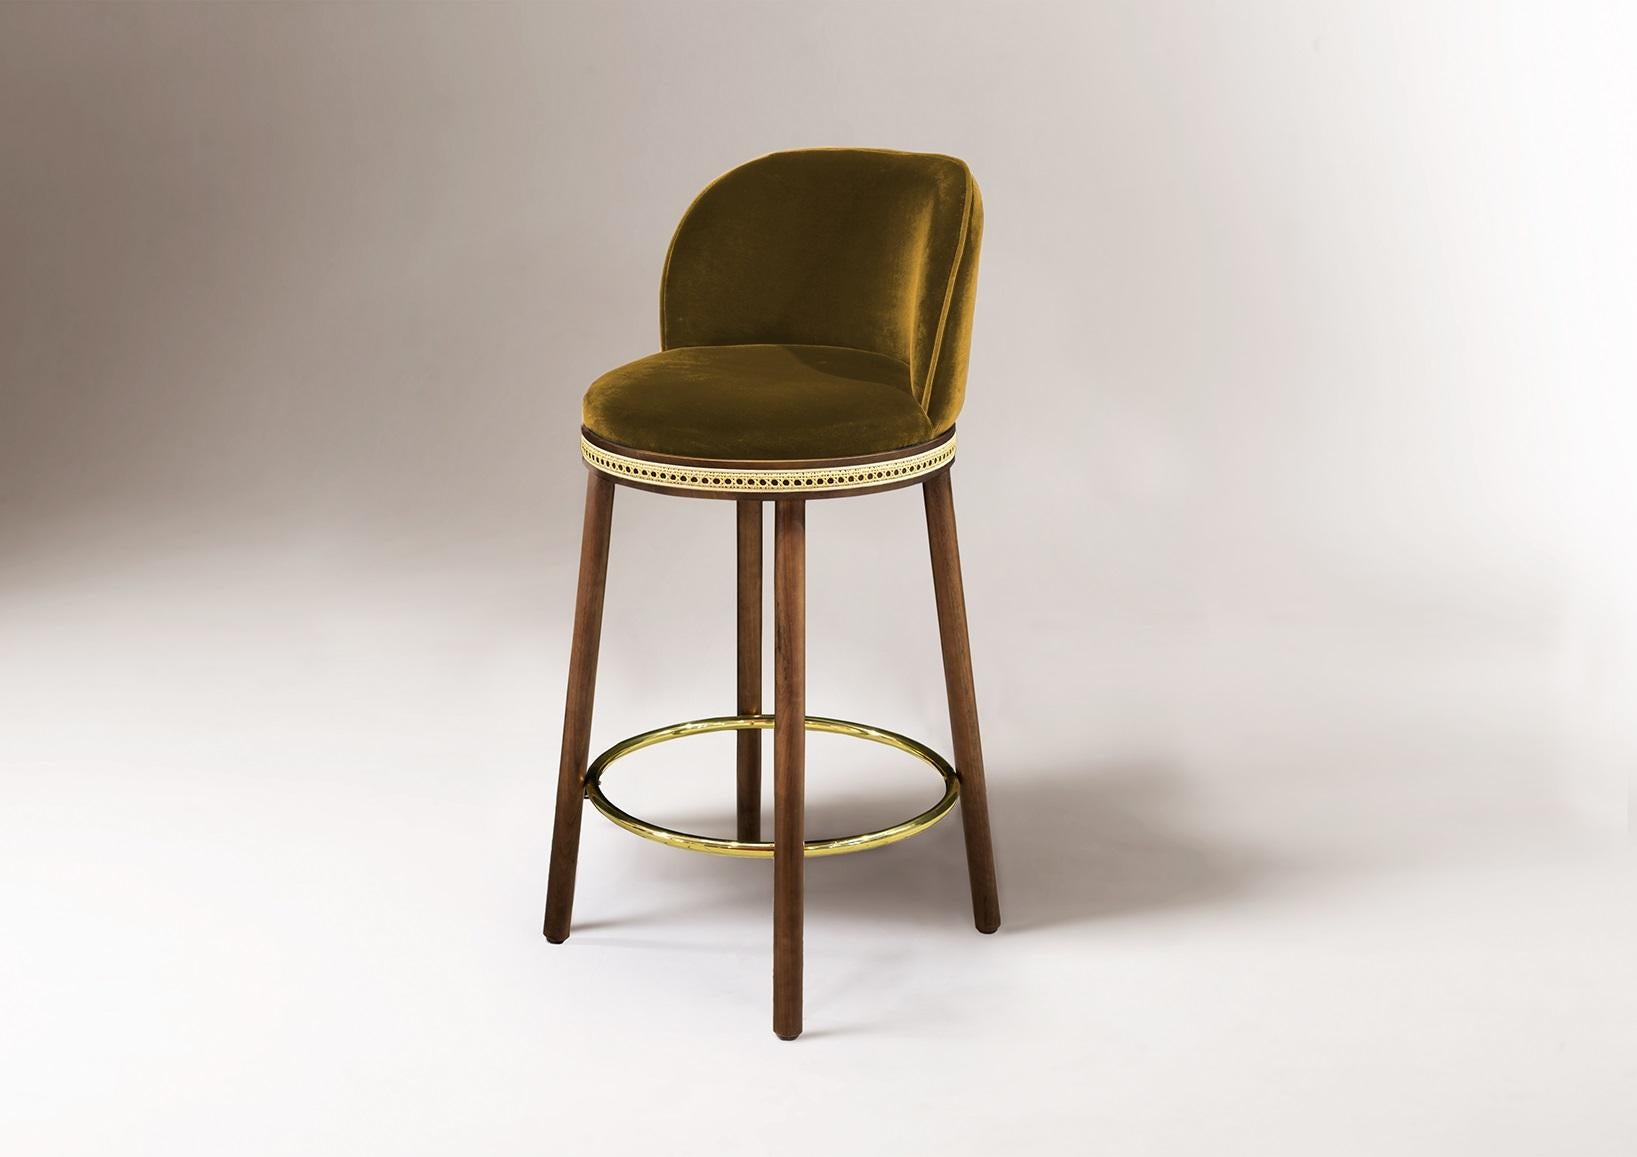 DOOQ Mid-Century Modern Counter Chair Alma with Velvet, Walnut and Brass

n a piece that combines classic and modern aesthetics we can find a certain harmonic gracefulness paired with an intimate voluptuousness that can embrace you and surprisingly